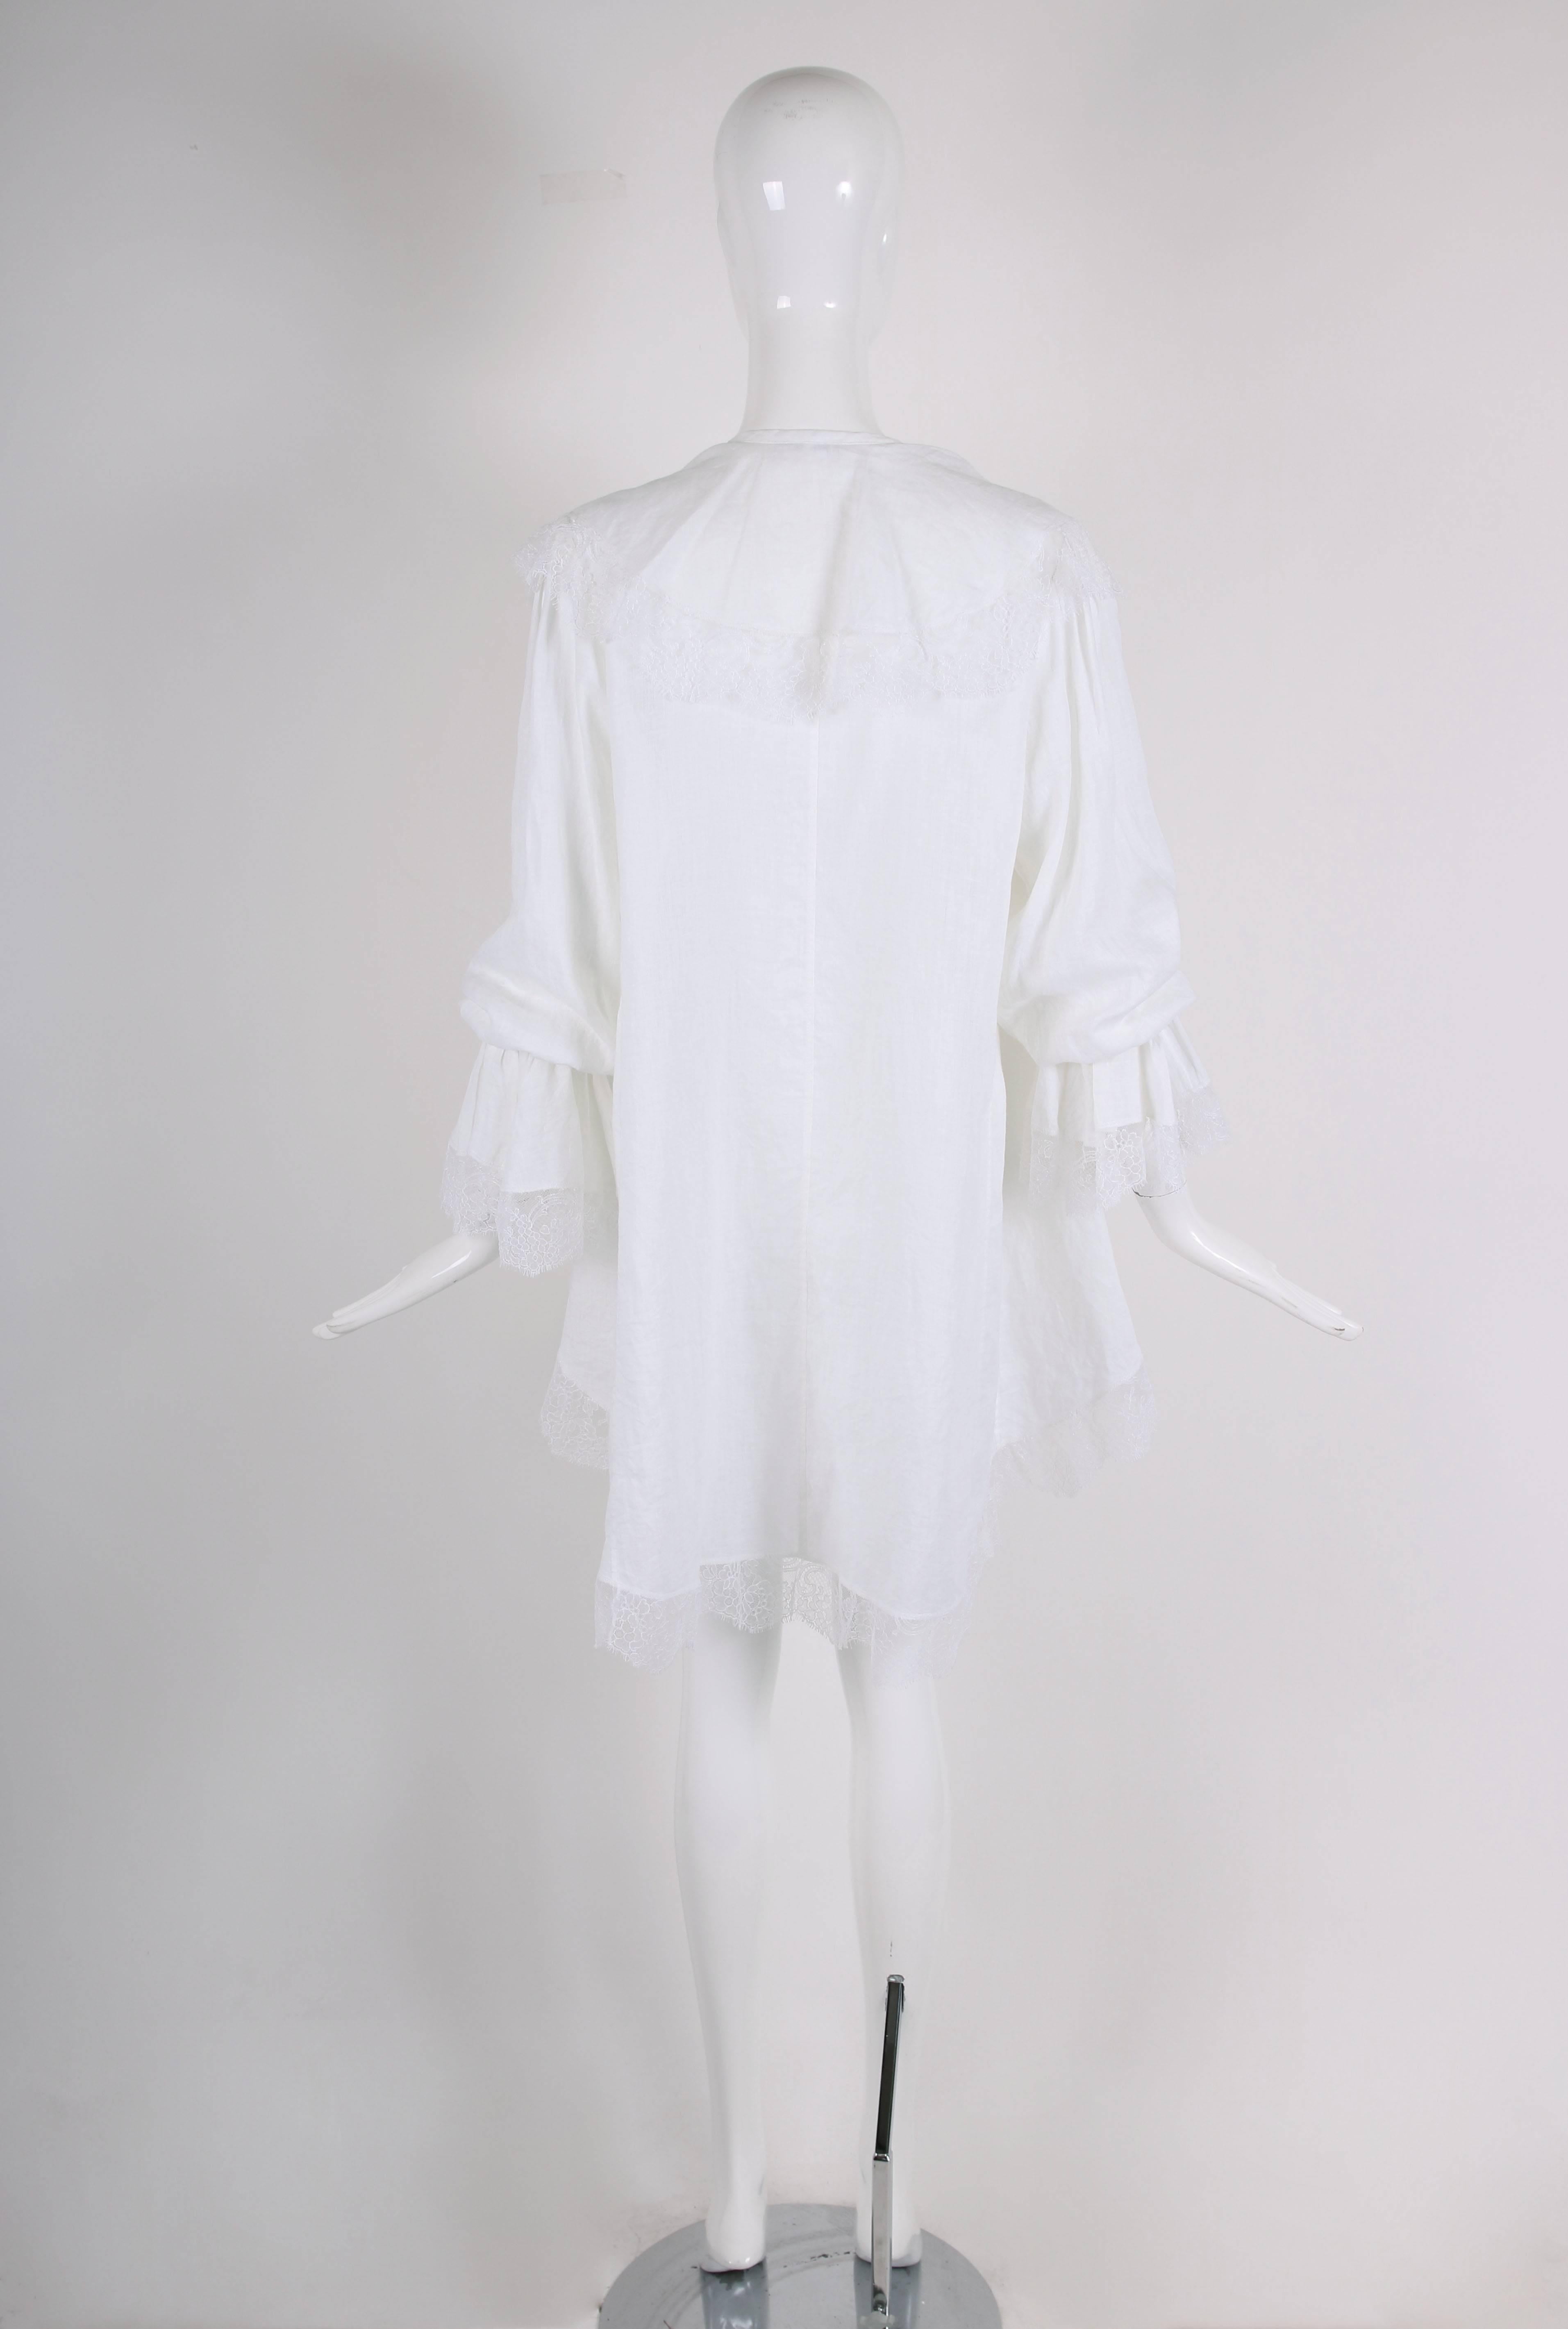 Gray Yves Saint Laurent YSL White Linen Poet Blouse with Open Front and Lace Trim For Sale